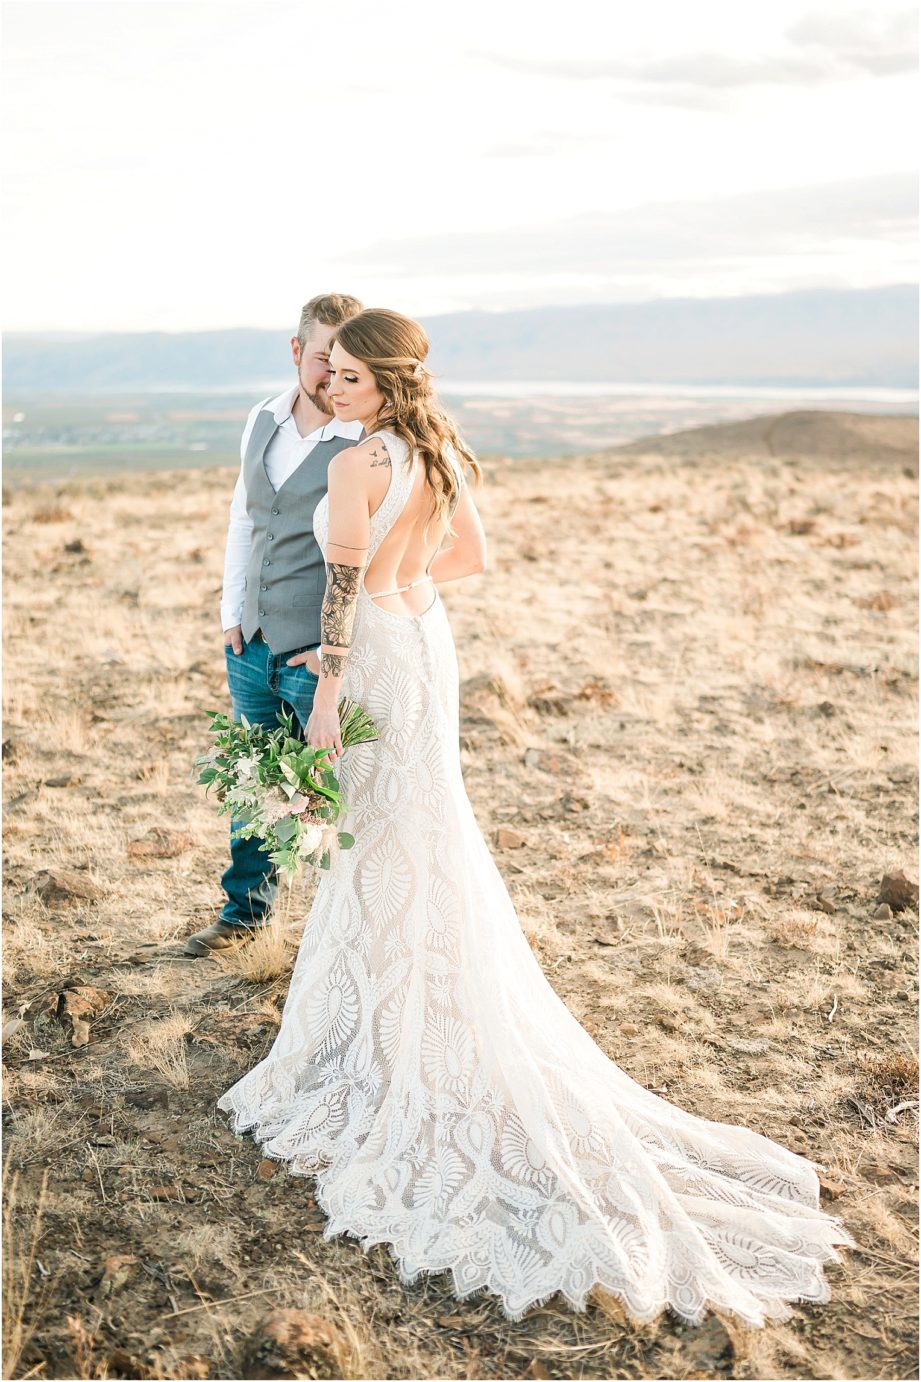 Eastern Washington Elopement Photographer Mike and Carley boho bride on mountain top